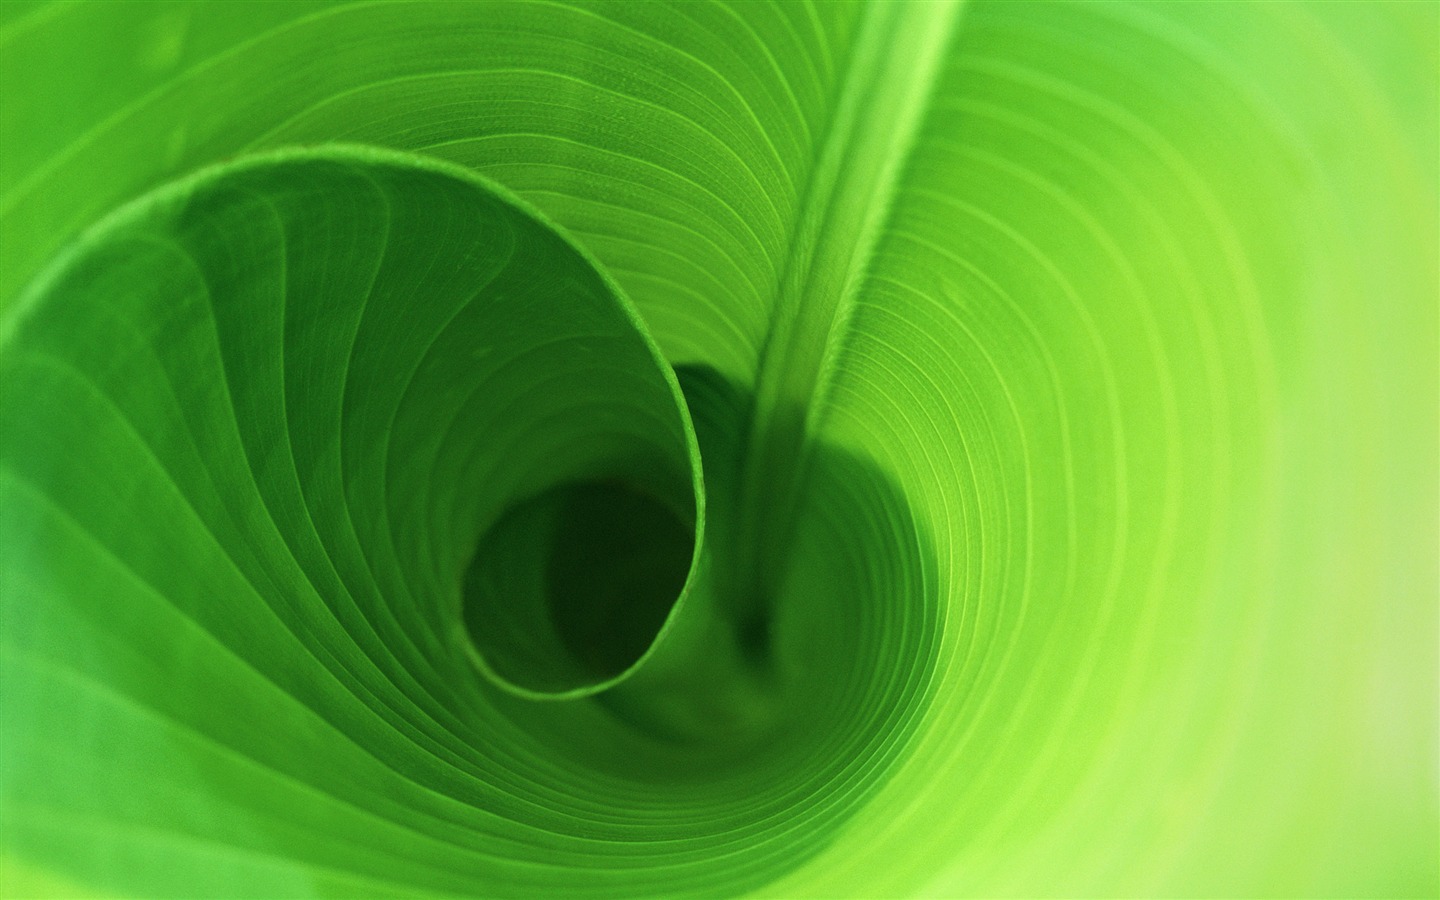 Large green leaves close-up flower wallpaper (2) #3 - 1440x900